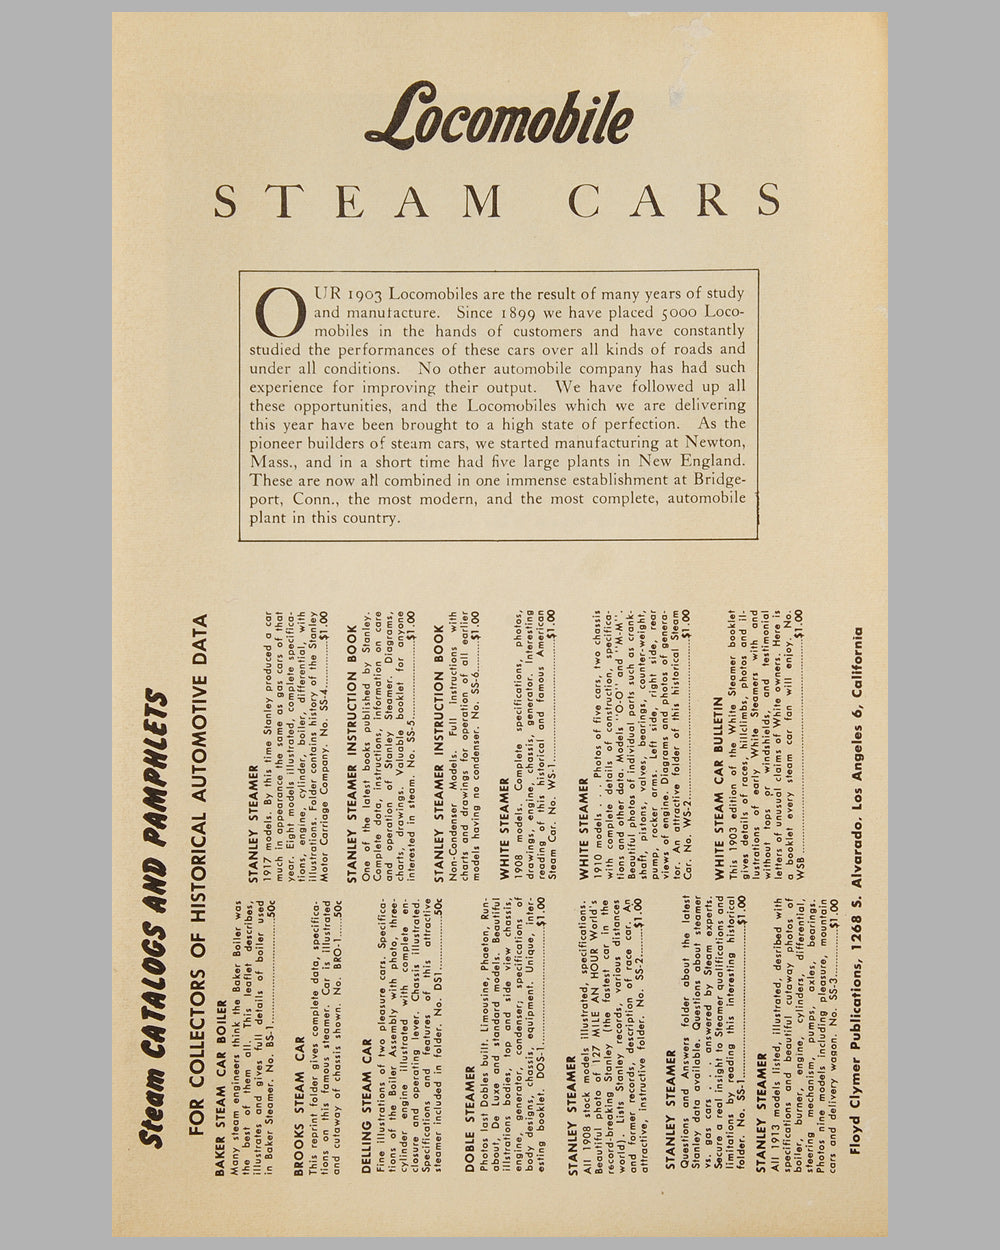 1903 Locomobile Steam Cars sales catalog reprint by F. Clymer